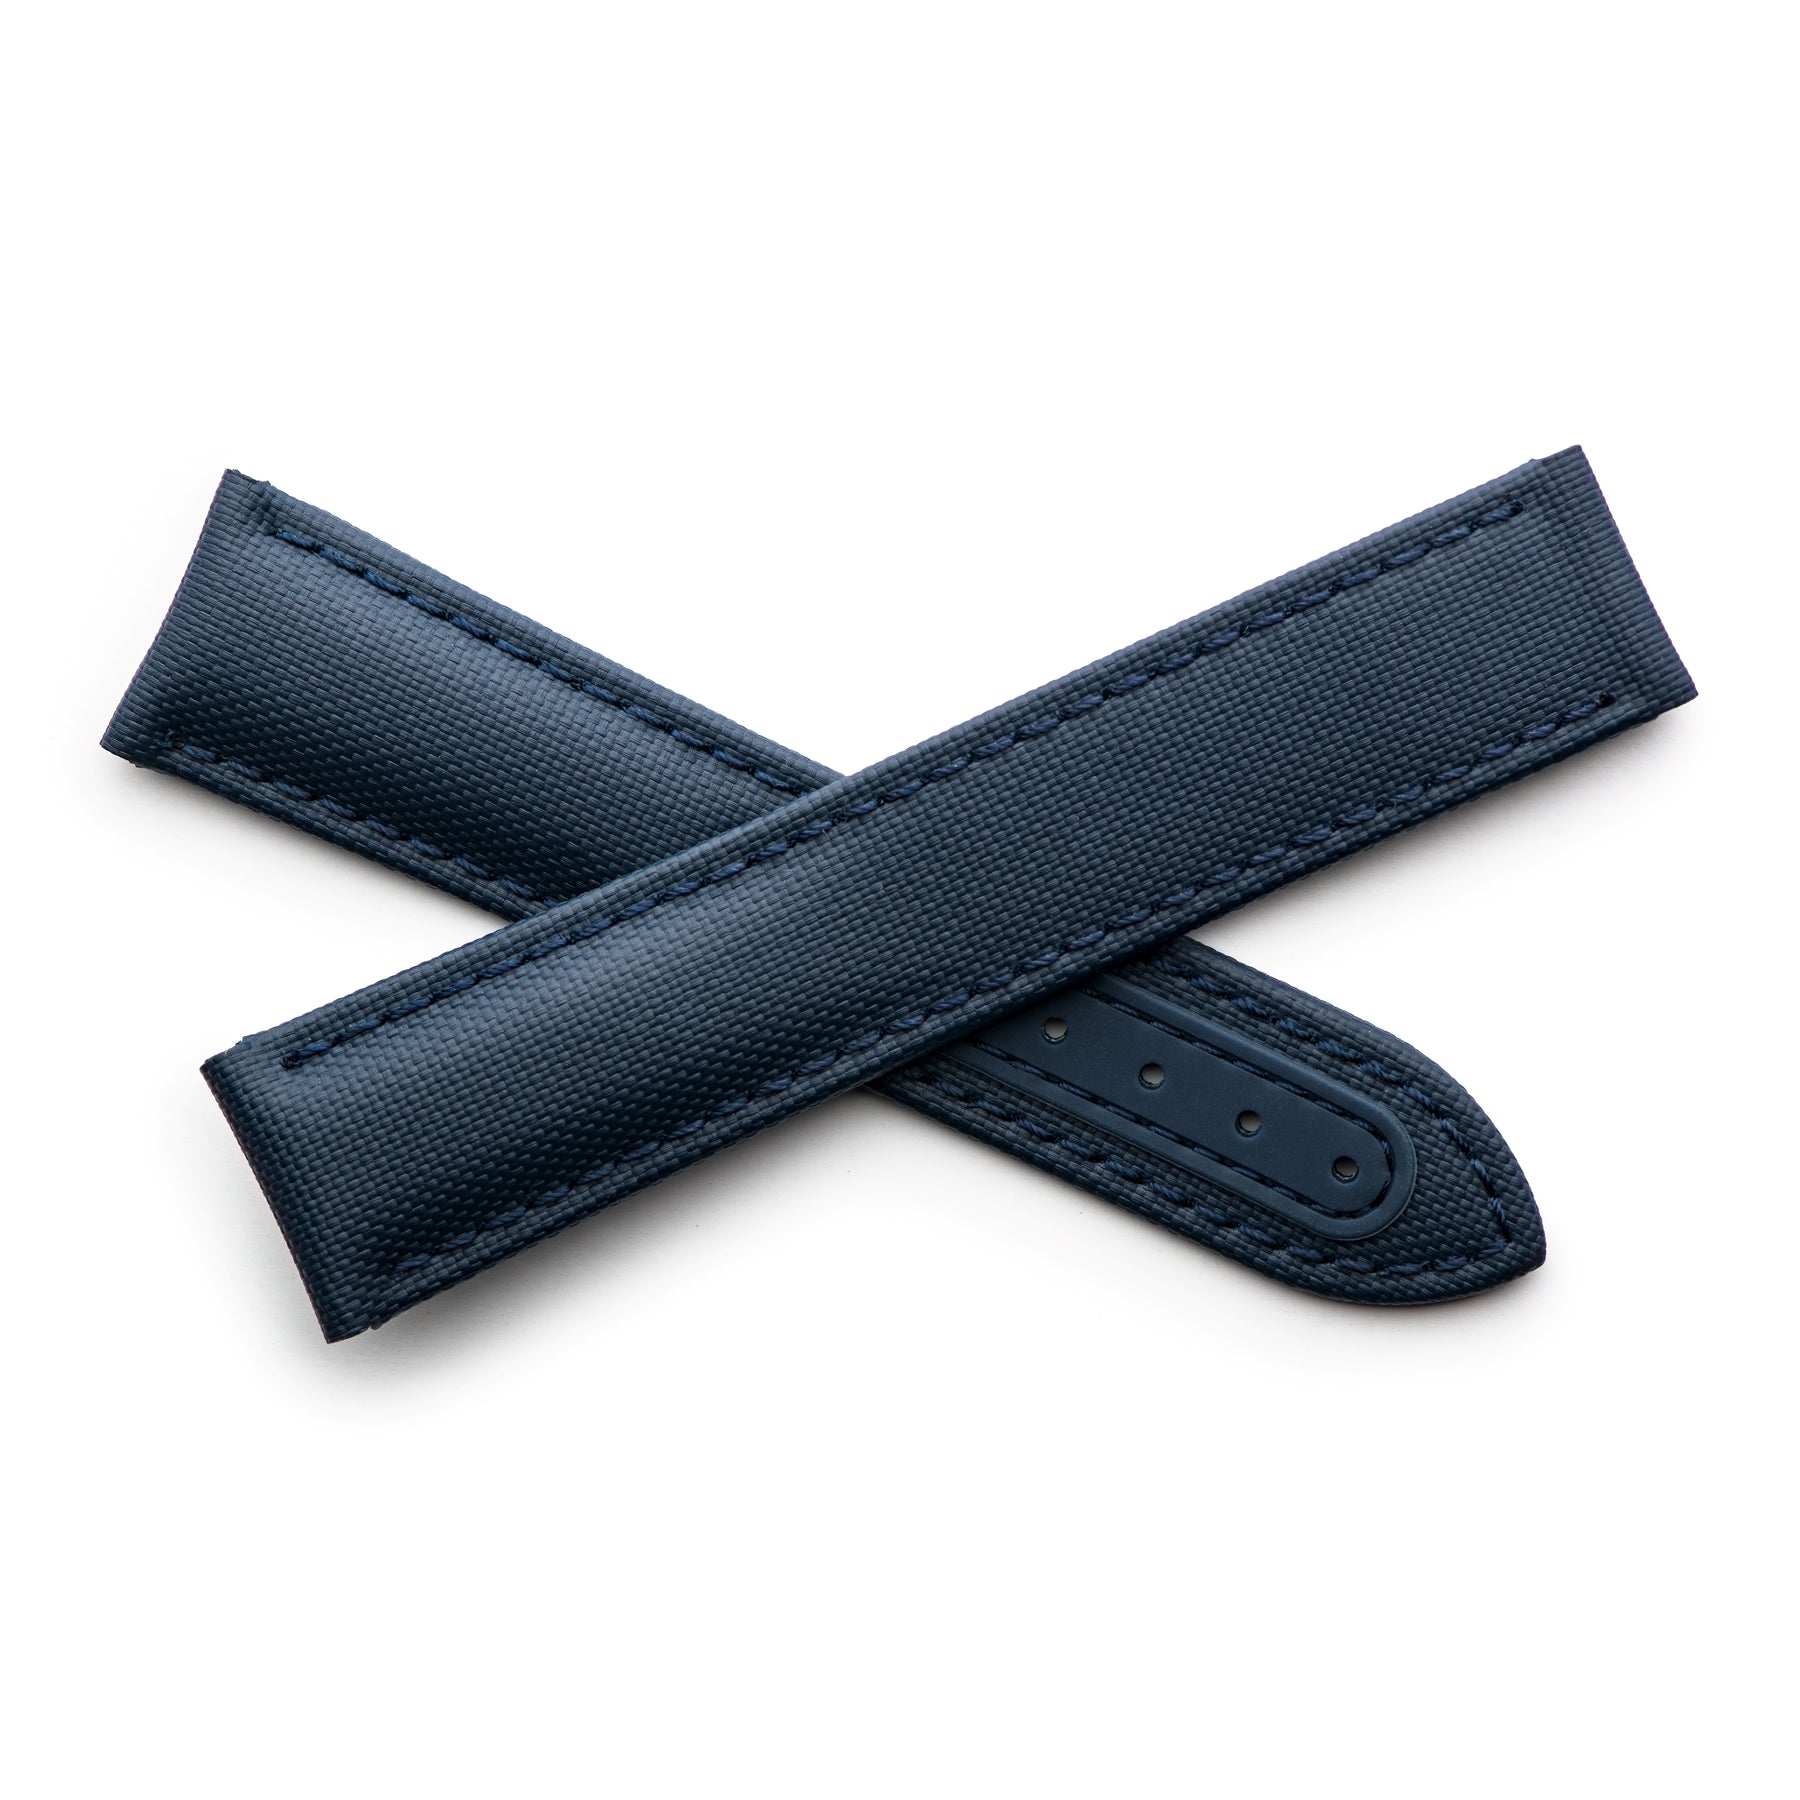 Loop-Less Navy Blue Sailcloth Watch Strap with Navy Blue Stitching